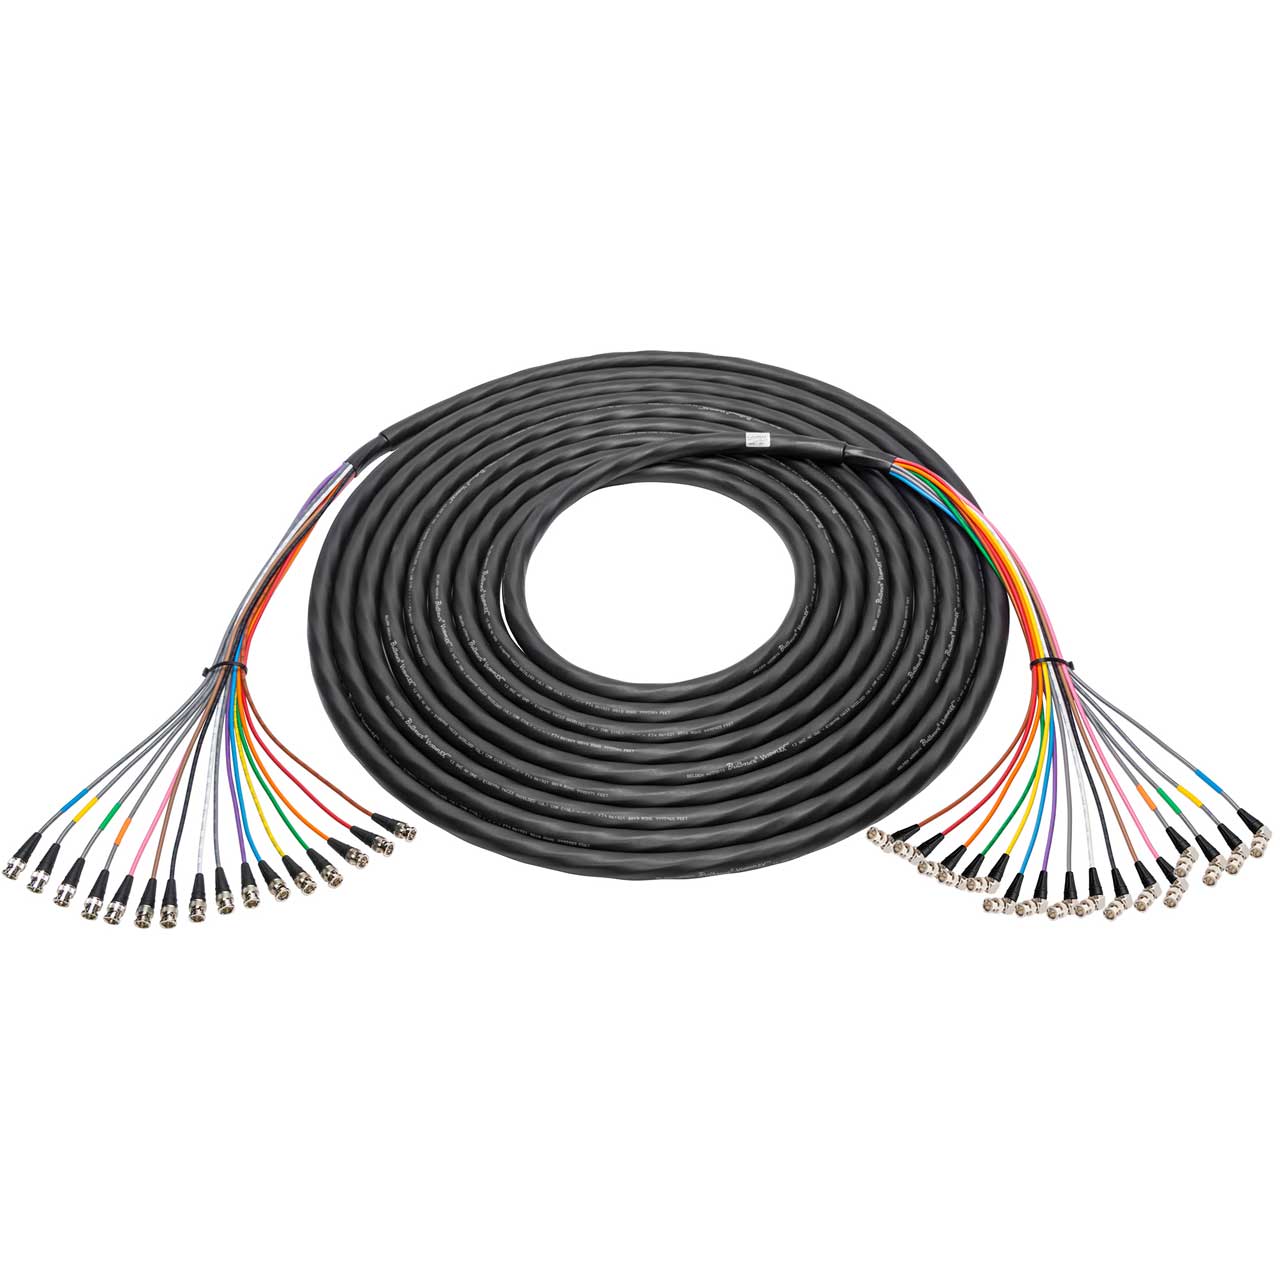 Laird 4855R16-BBA-006 16-Channel 12G-SDI/4K UHD BNC Male to Right Angle BNC Male Snake Cable - 6 Foot 4855R16-BBA-006